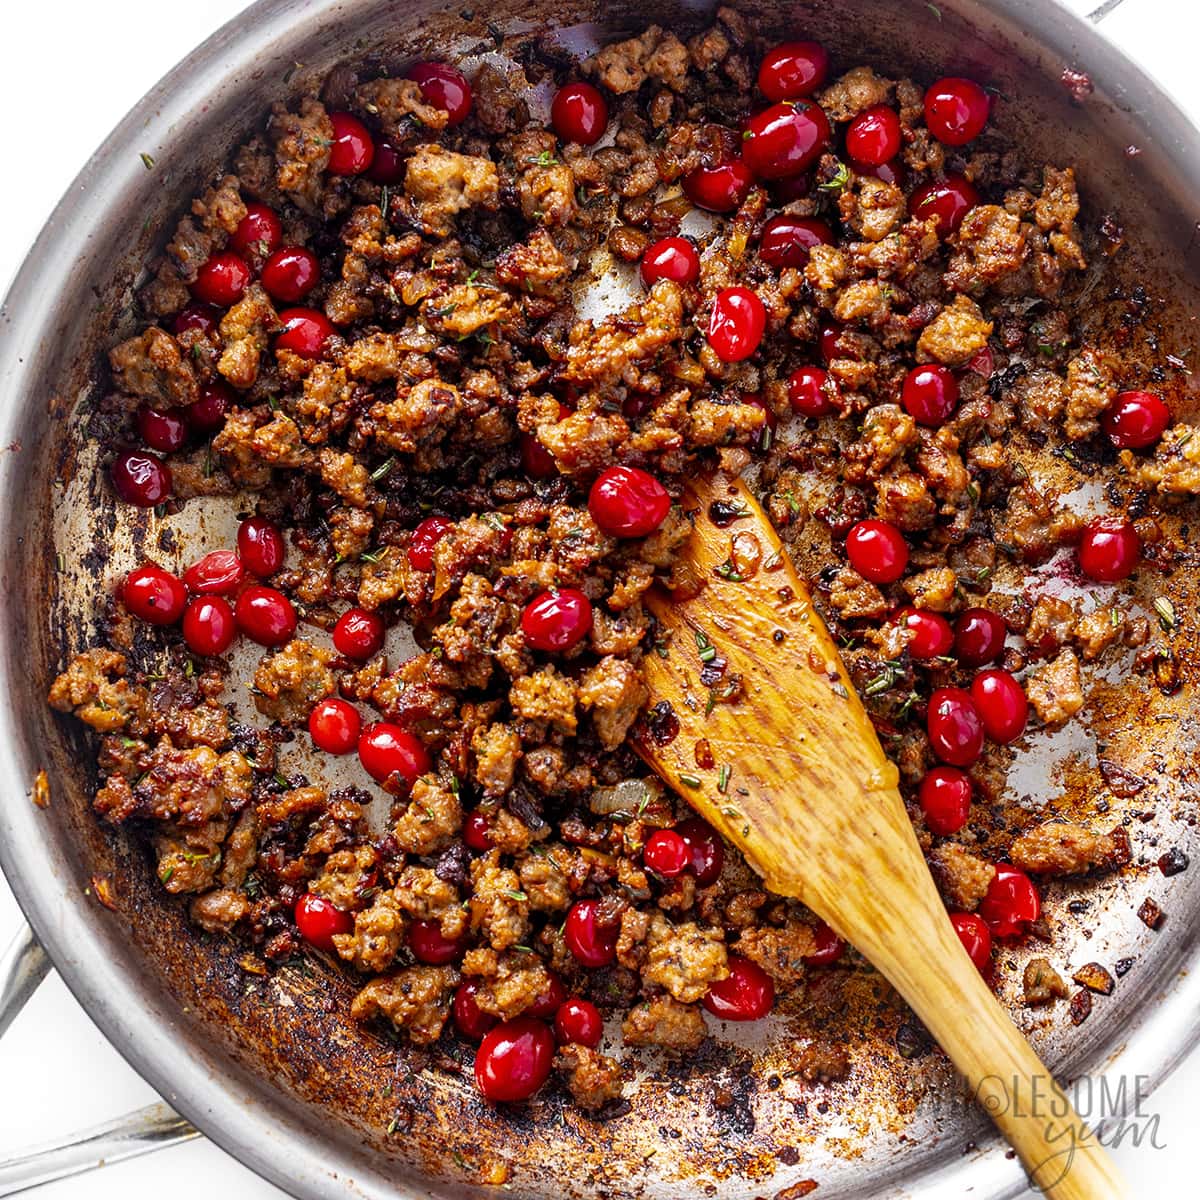 Add cranberries and herbs to sausage in skillet.